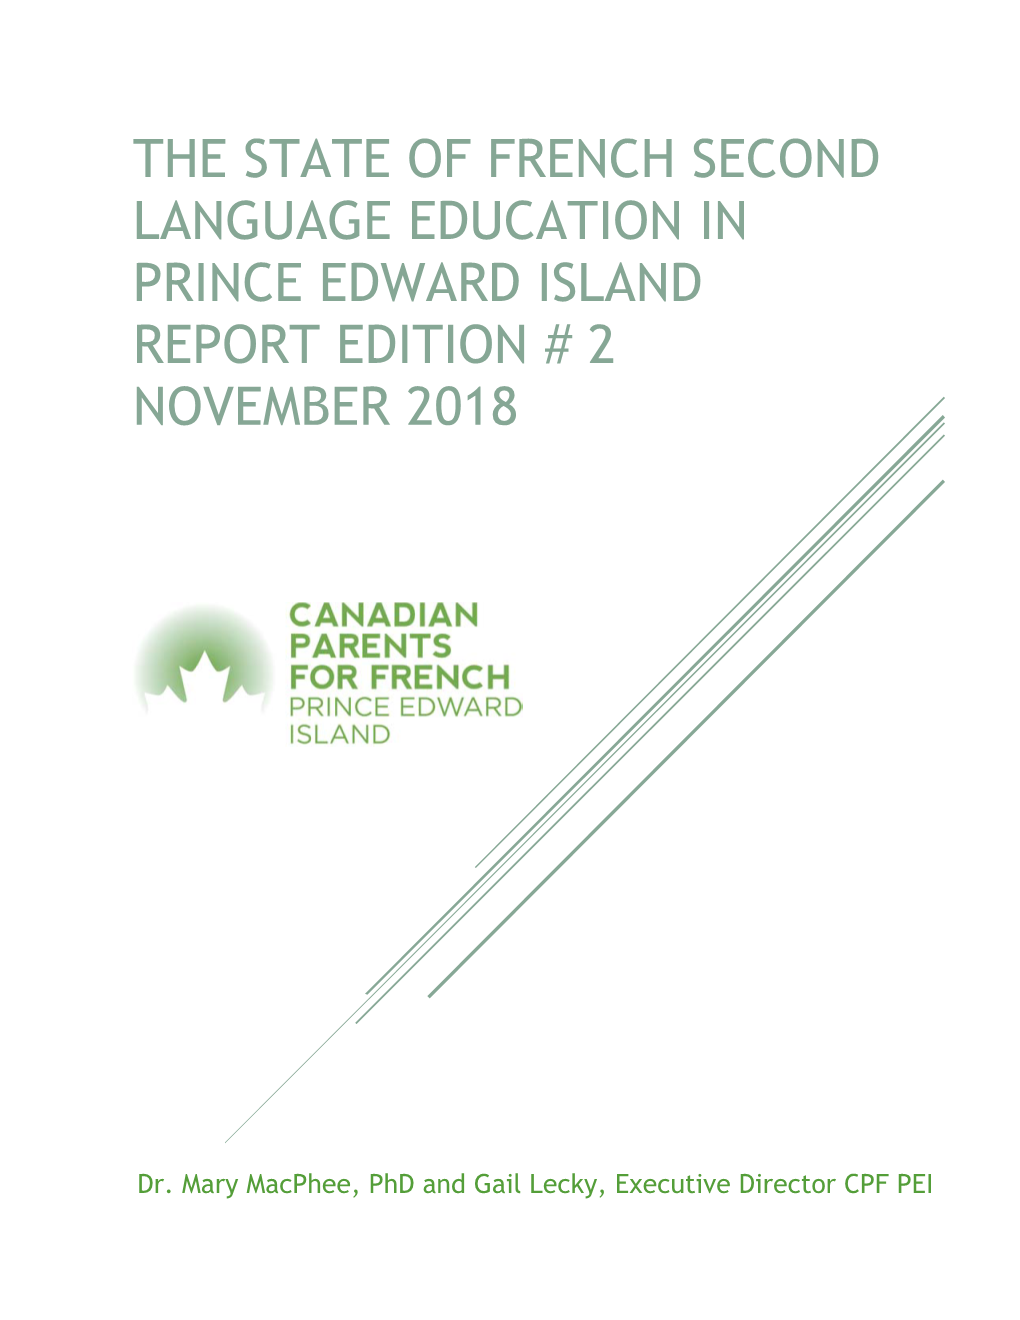 The State of French Second Language Education in Prince Edward Island